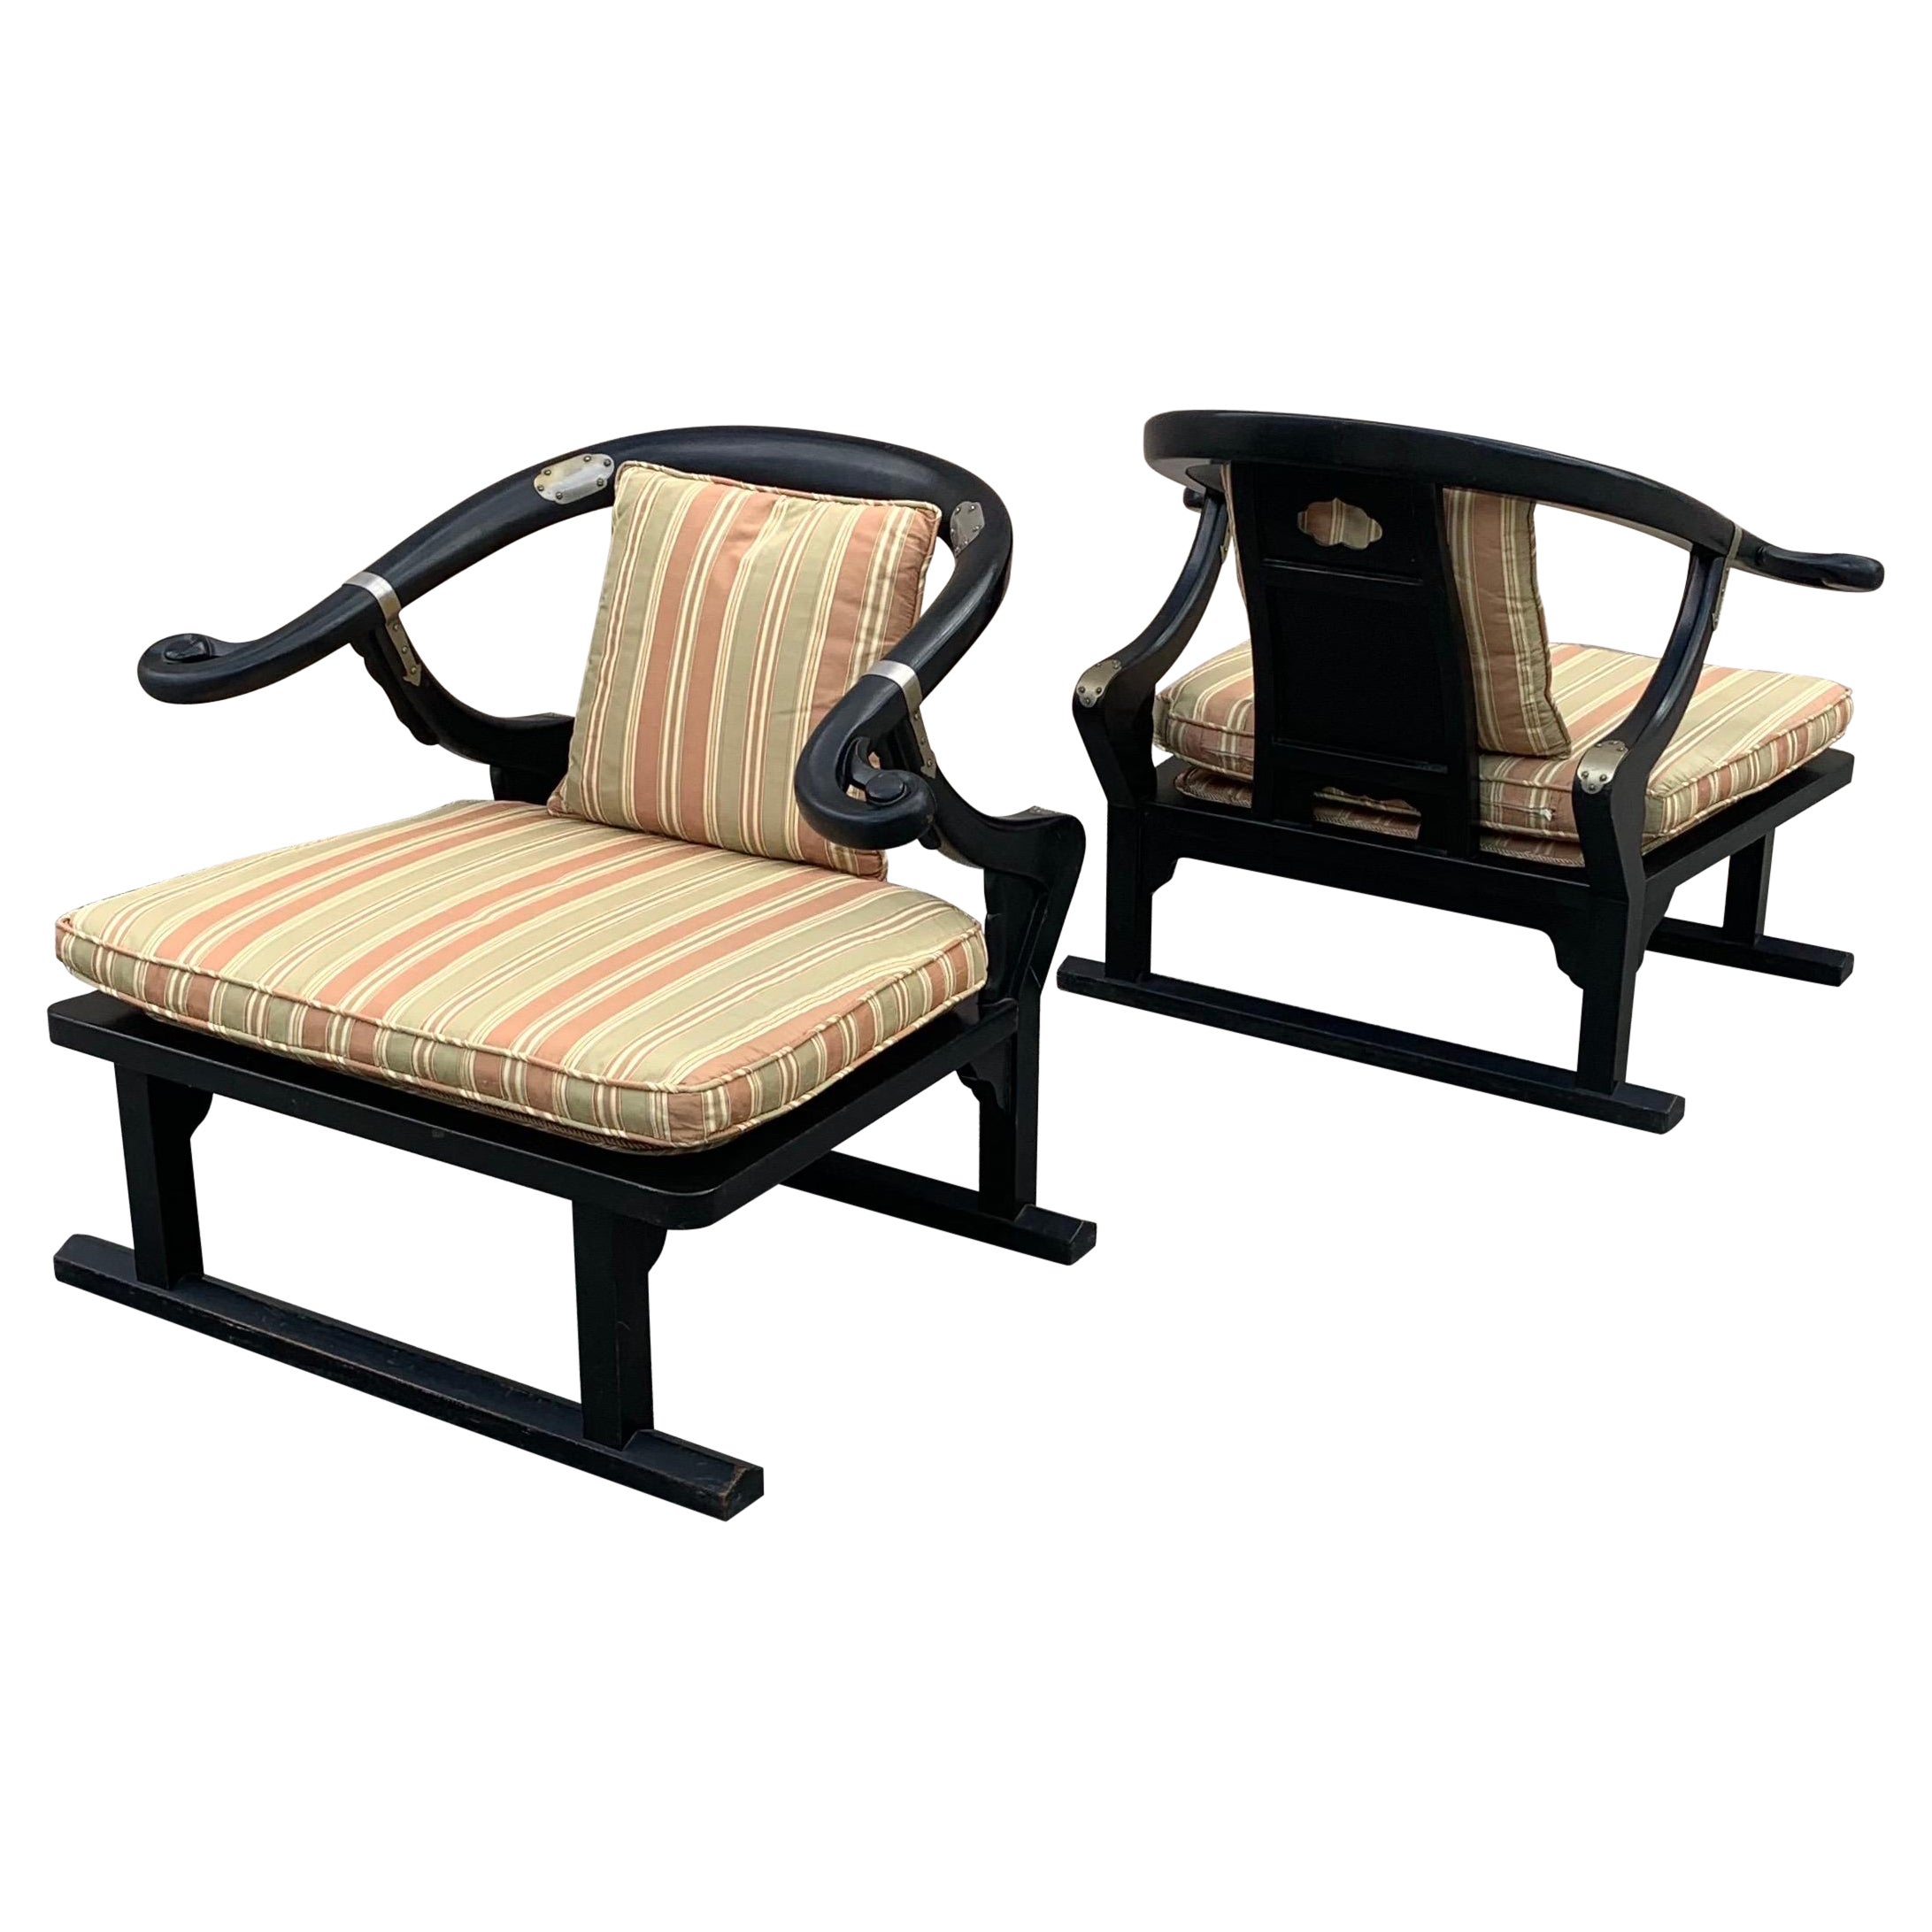 Michael Taylor for Baker Ebony Lounge Chairs from the Far East Collection